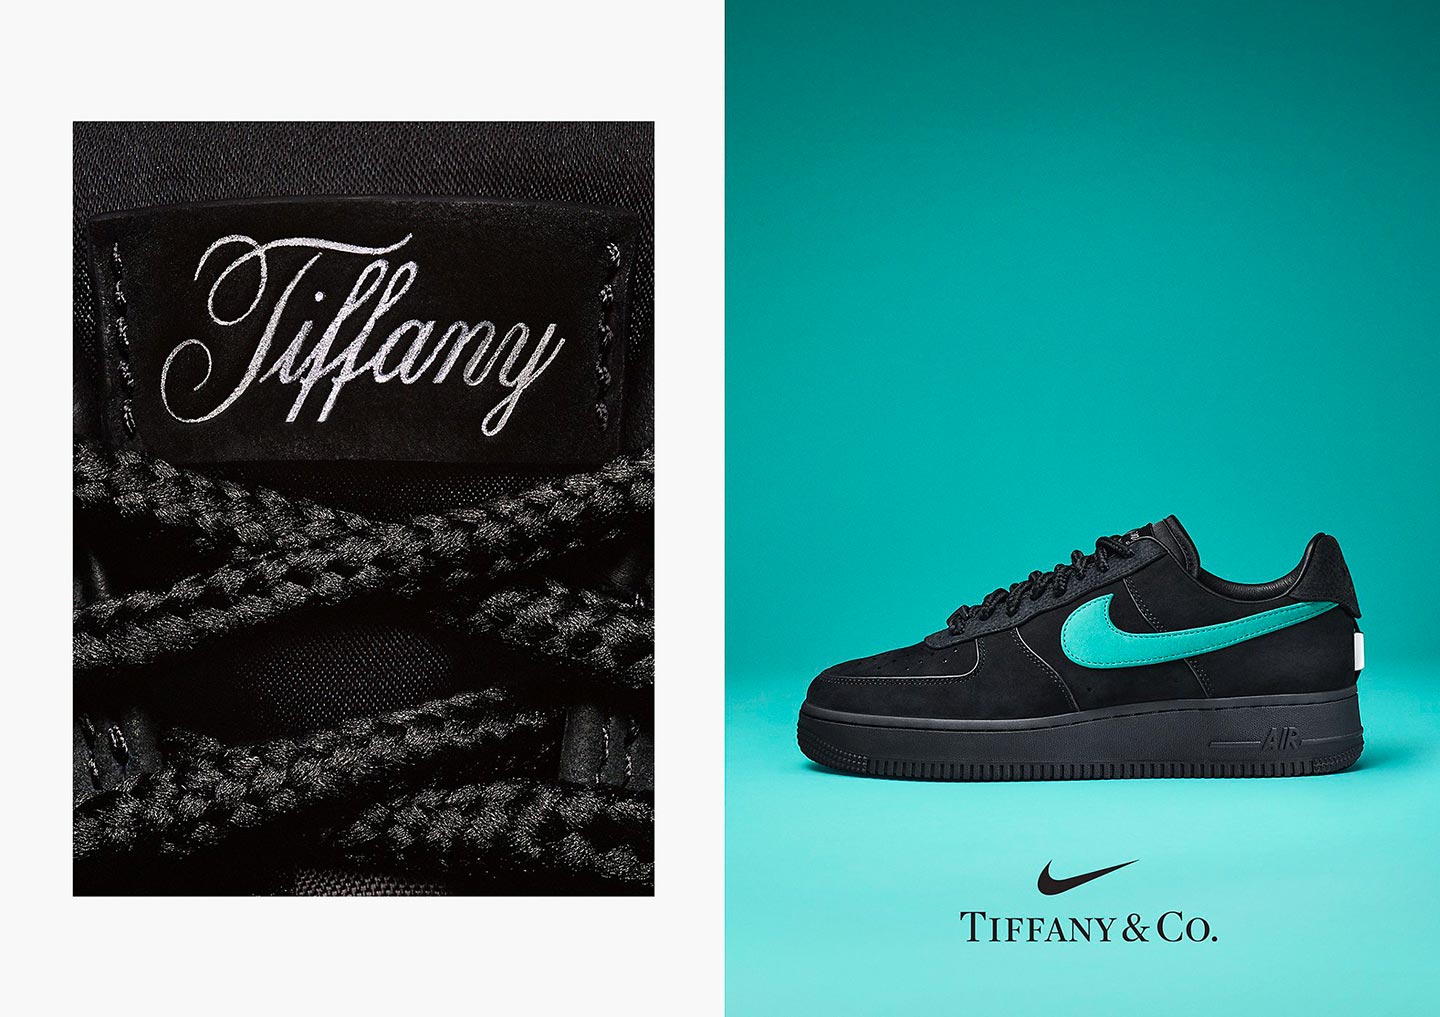 The Nike/Tiffany Air Force 1 1837 is crafted in black suede with a Tiffany blue Swoosh and archival Tiffany logo on the tongue